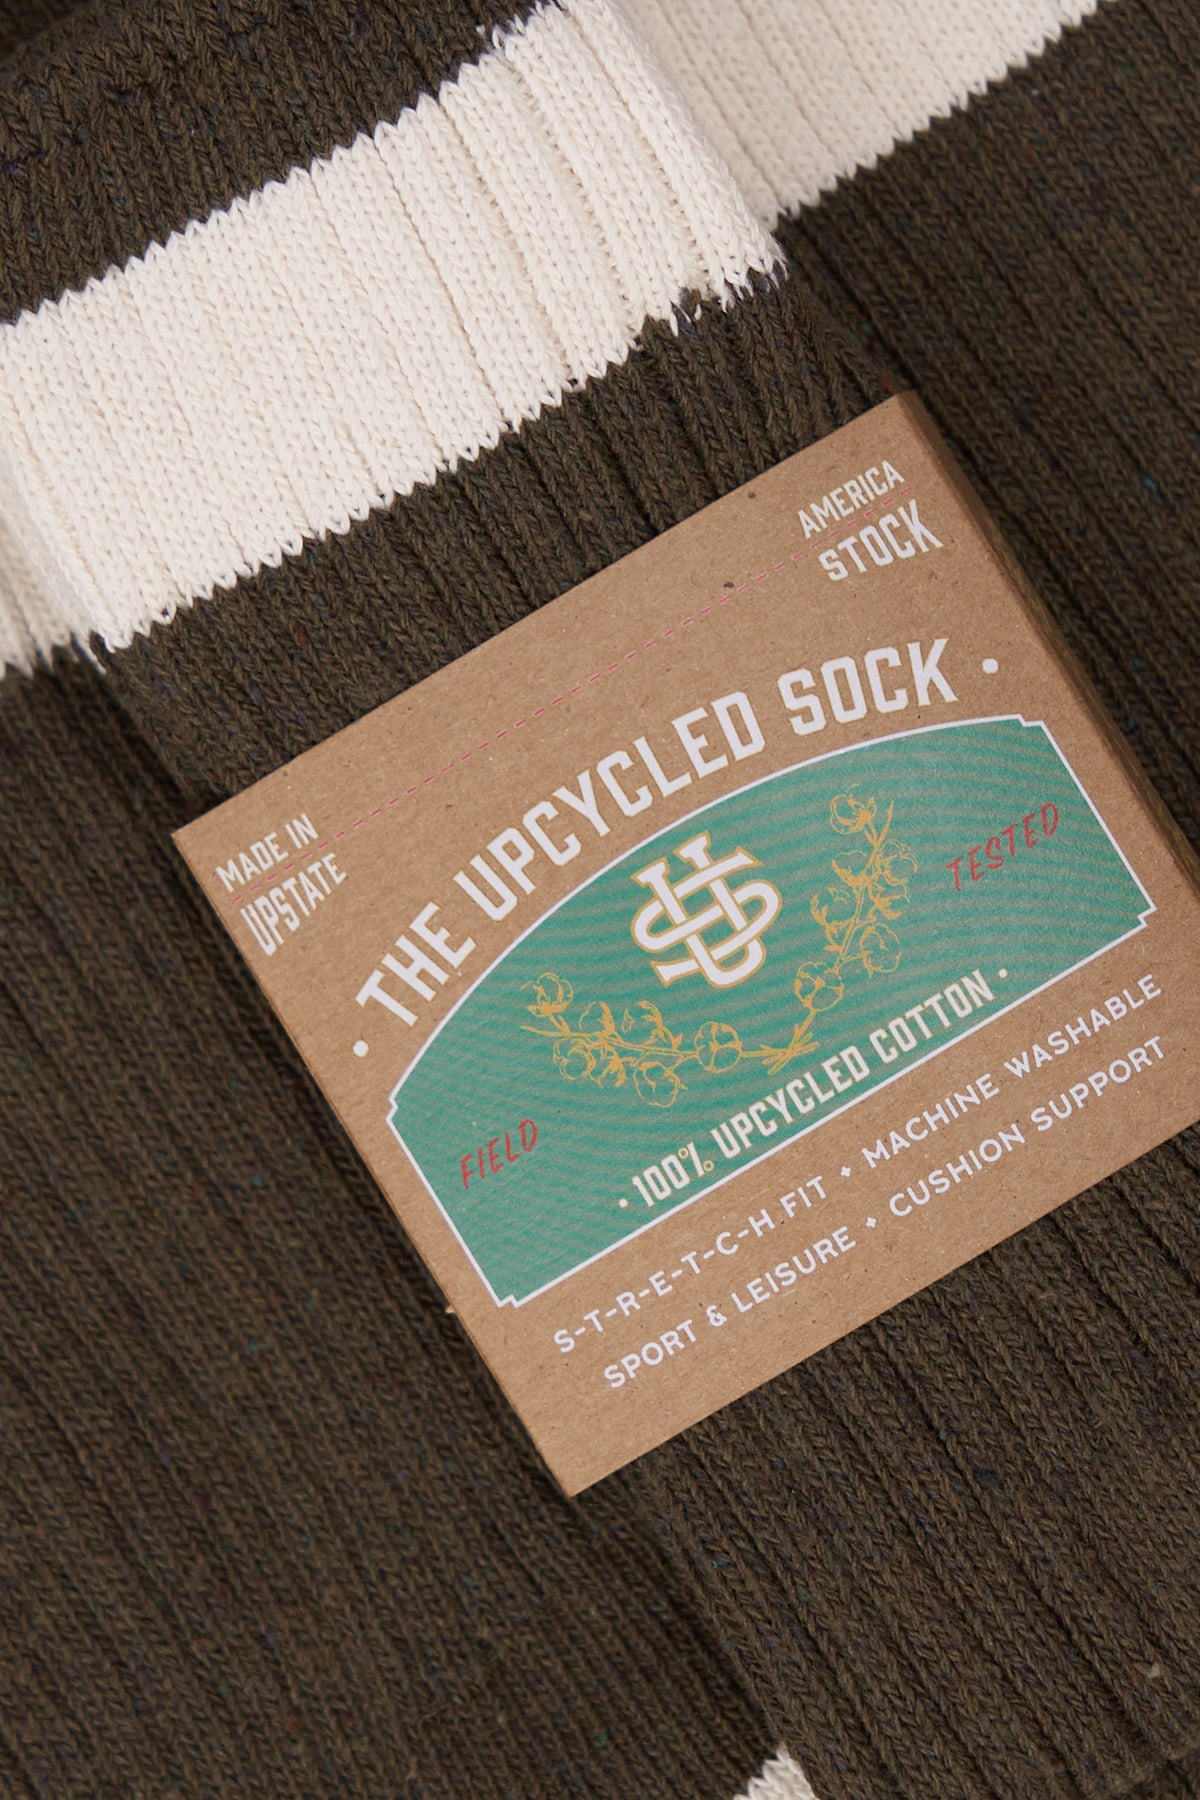 NEW The Upcycled Sock - Olive Drab